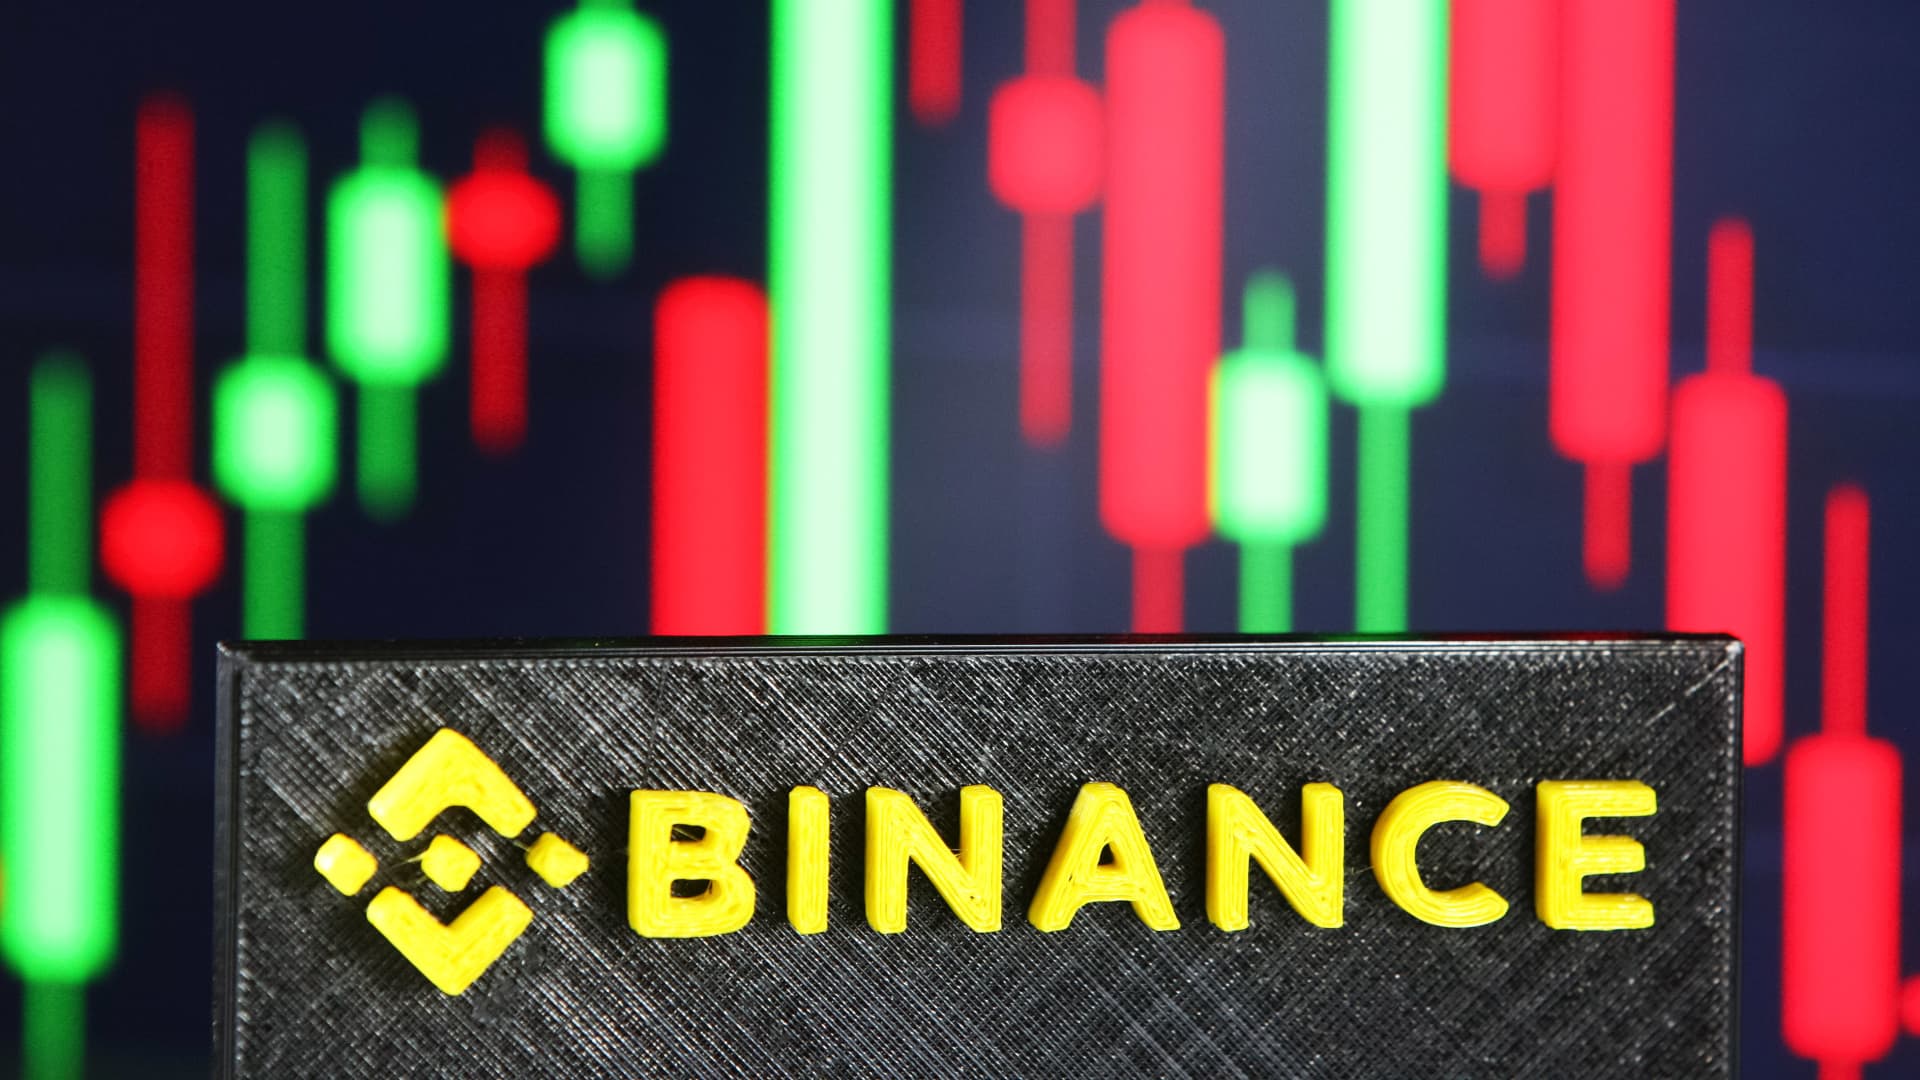 Binance is backing Elon Musk’s Twitter bid, boosting crypto believers’ vision of a ‘decentralized’ web